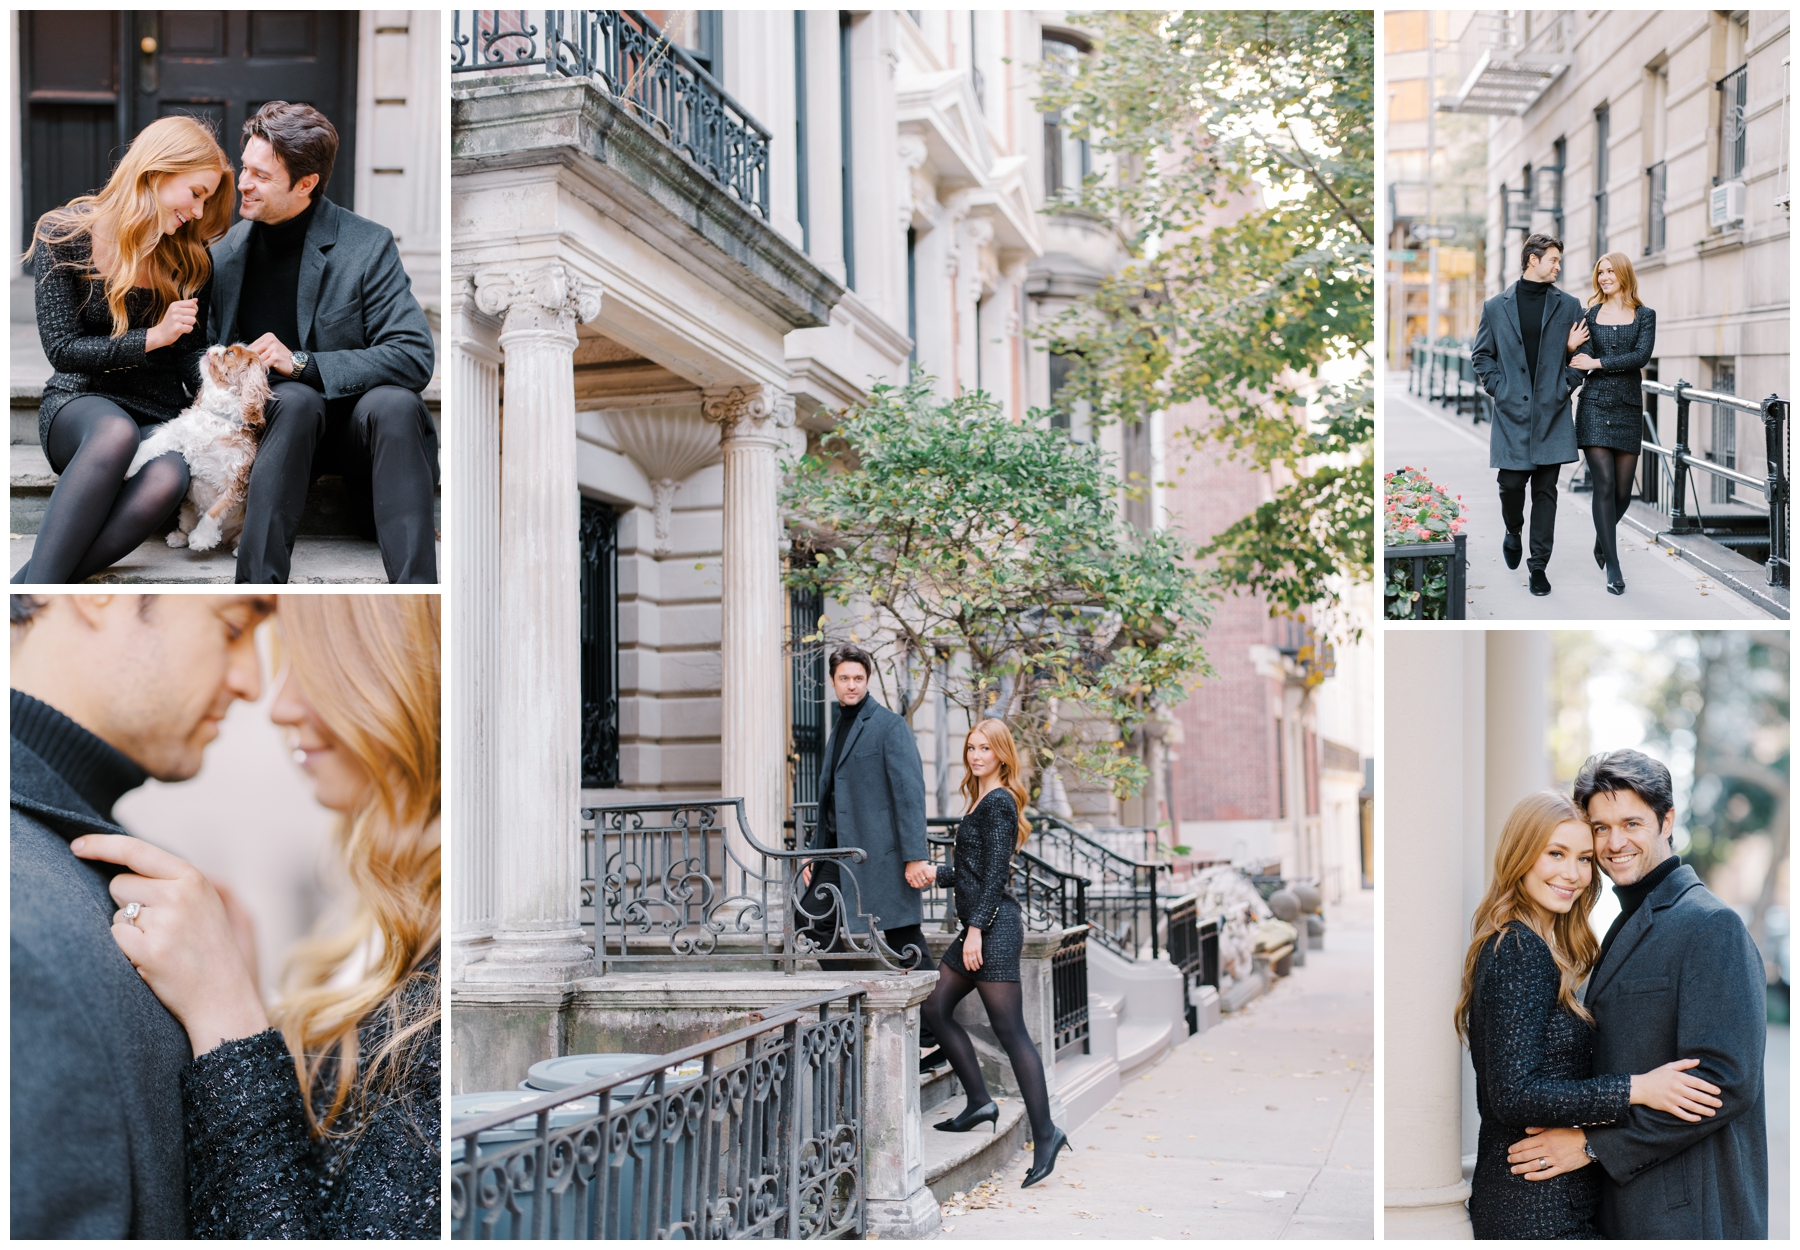 Upper East Side NY Engagement photographed by Stephanie Berenson Photography, a NY destination photographer